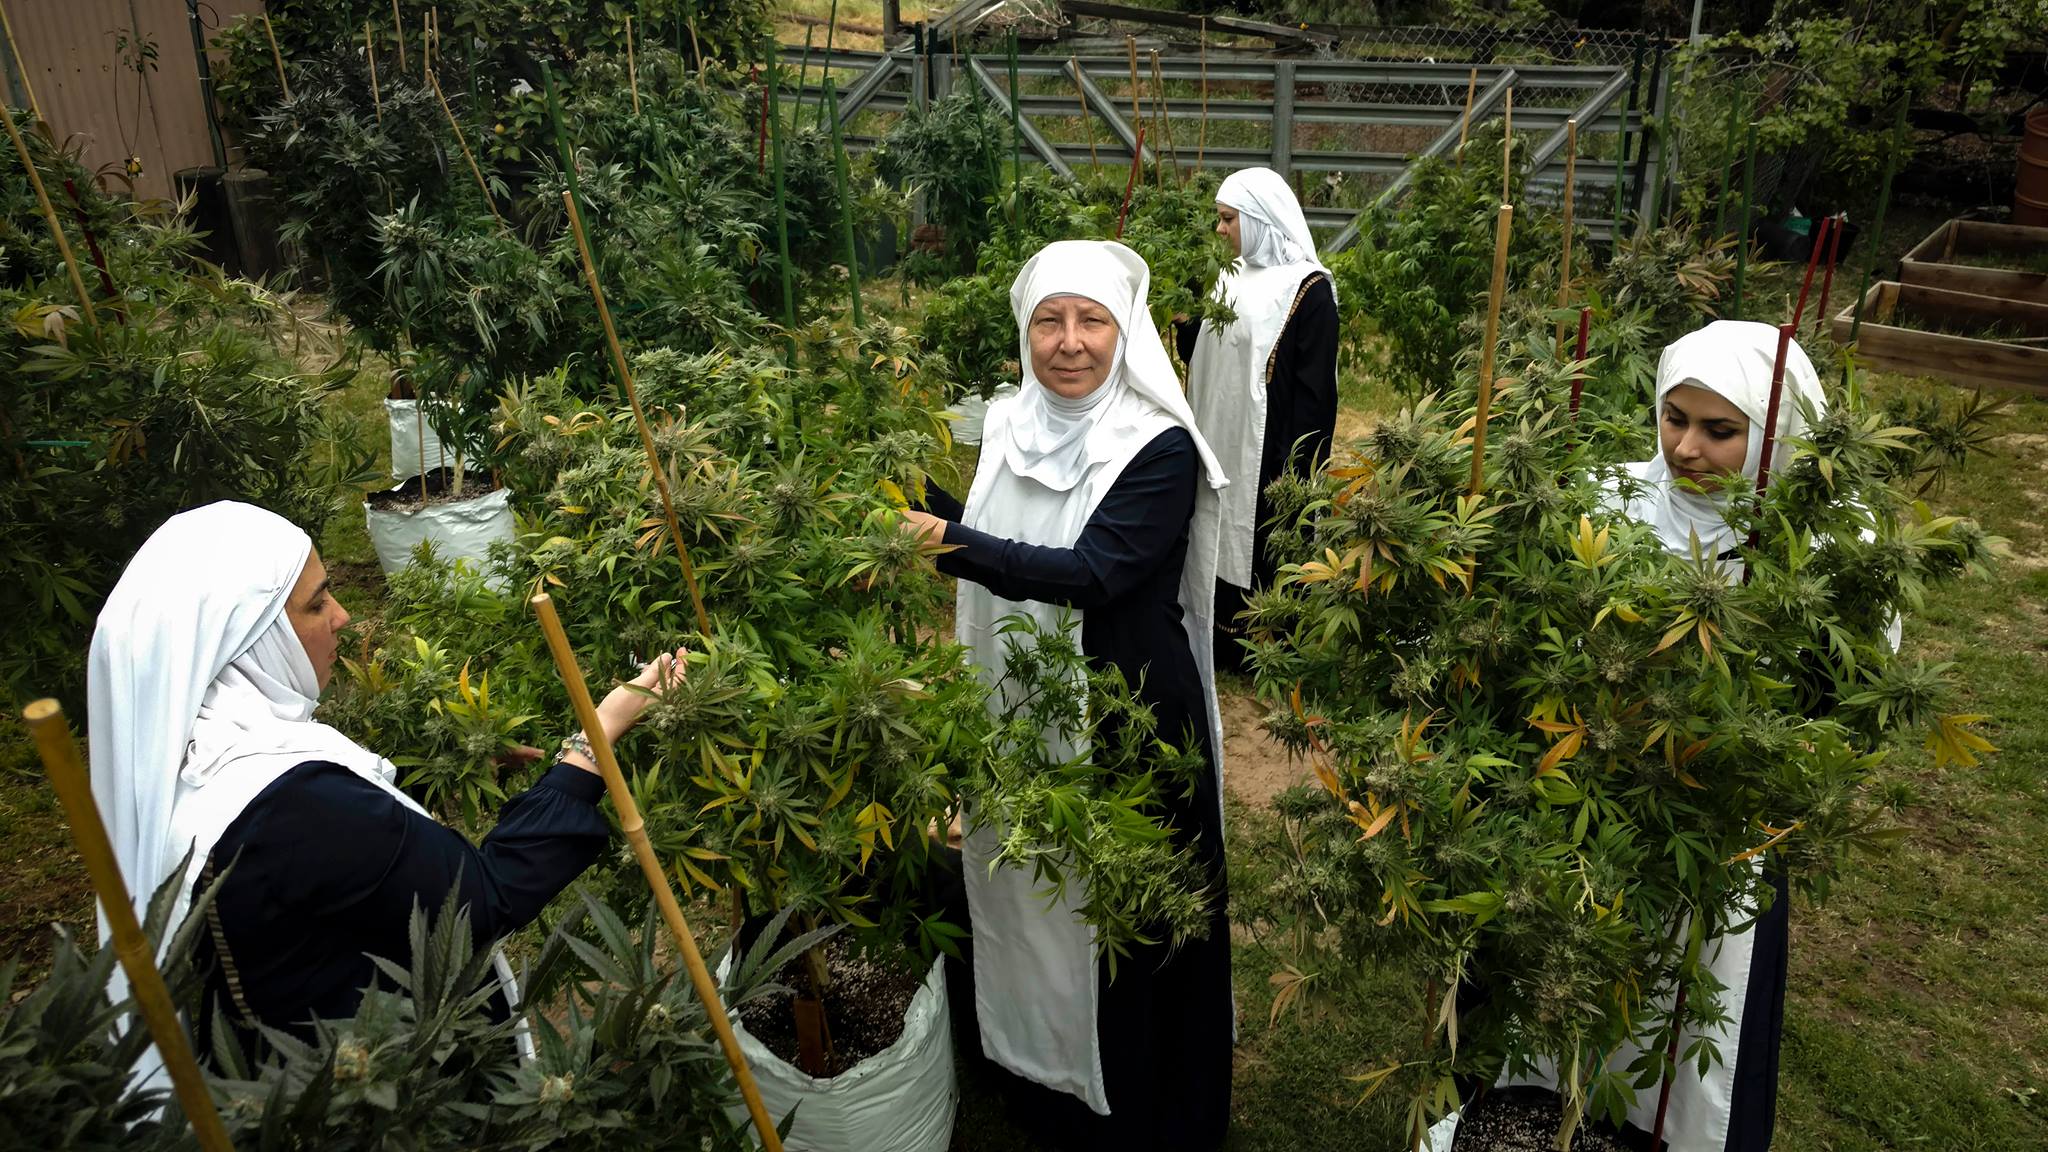 California’s ‘Weed Nuns’ On The Road To Healing With Cannabis